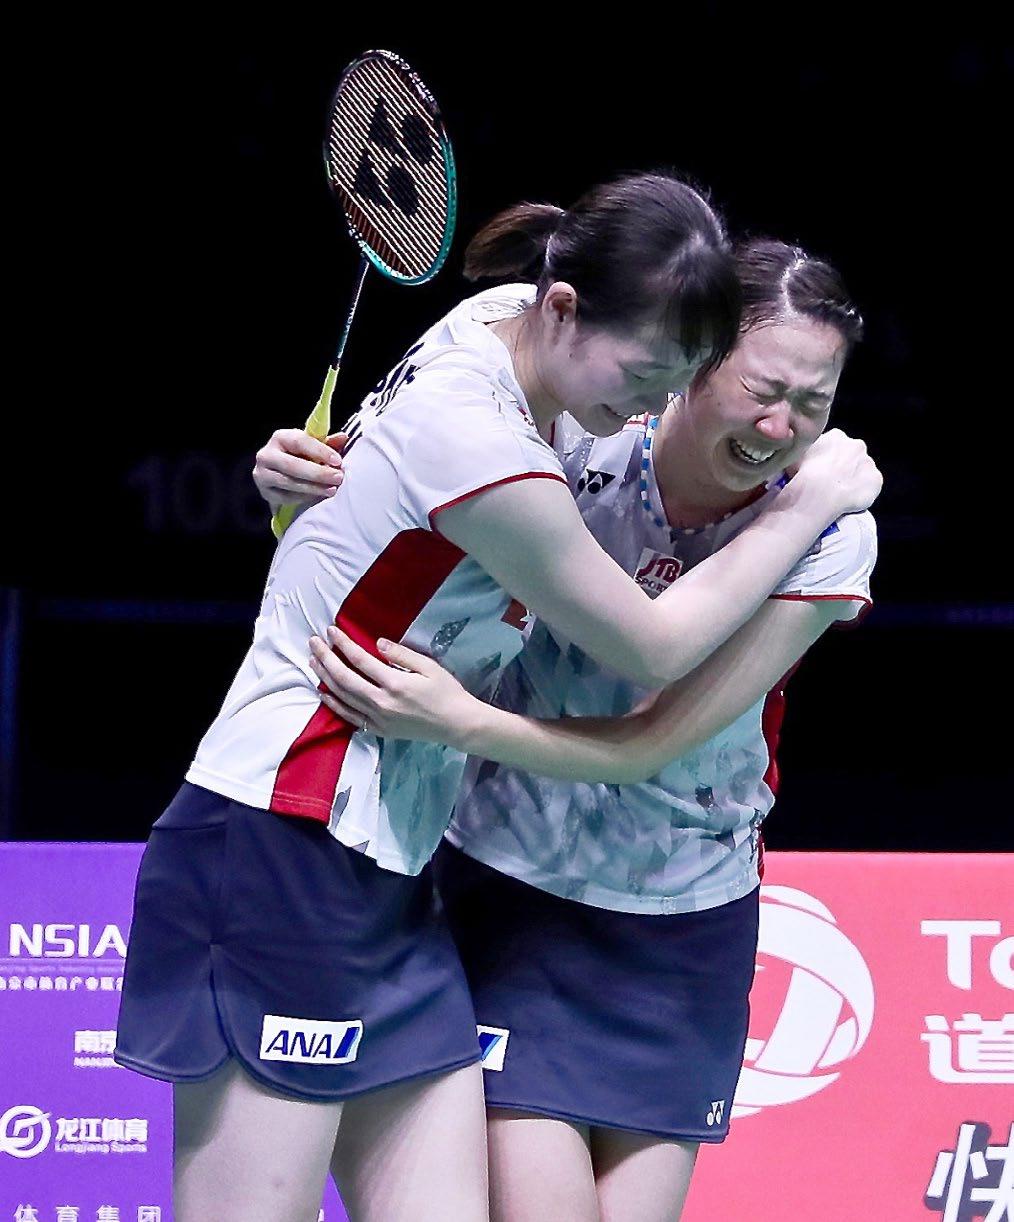 Elsewhere, Aaron Chia and Soh Wooi Yik (8) were among the tournament s surprise packages. The unheralded Malaysians fought courageously to reach the quarter-finals before losing to Li and Liu.